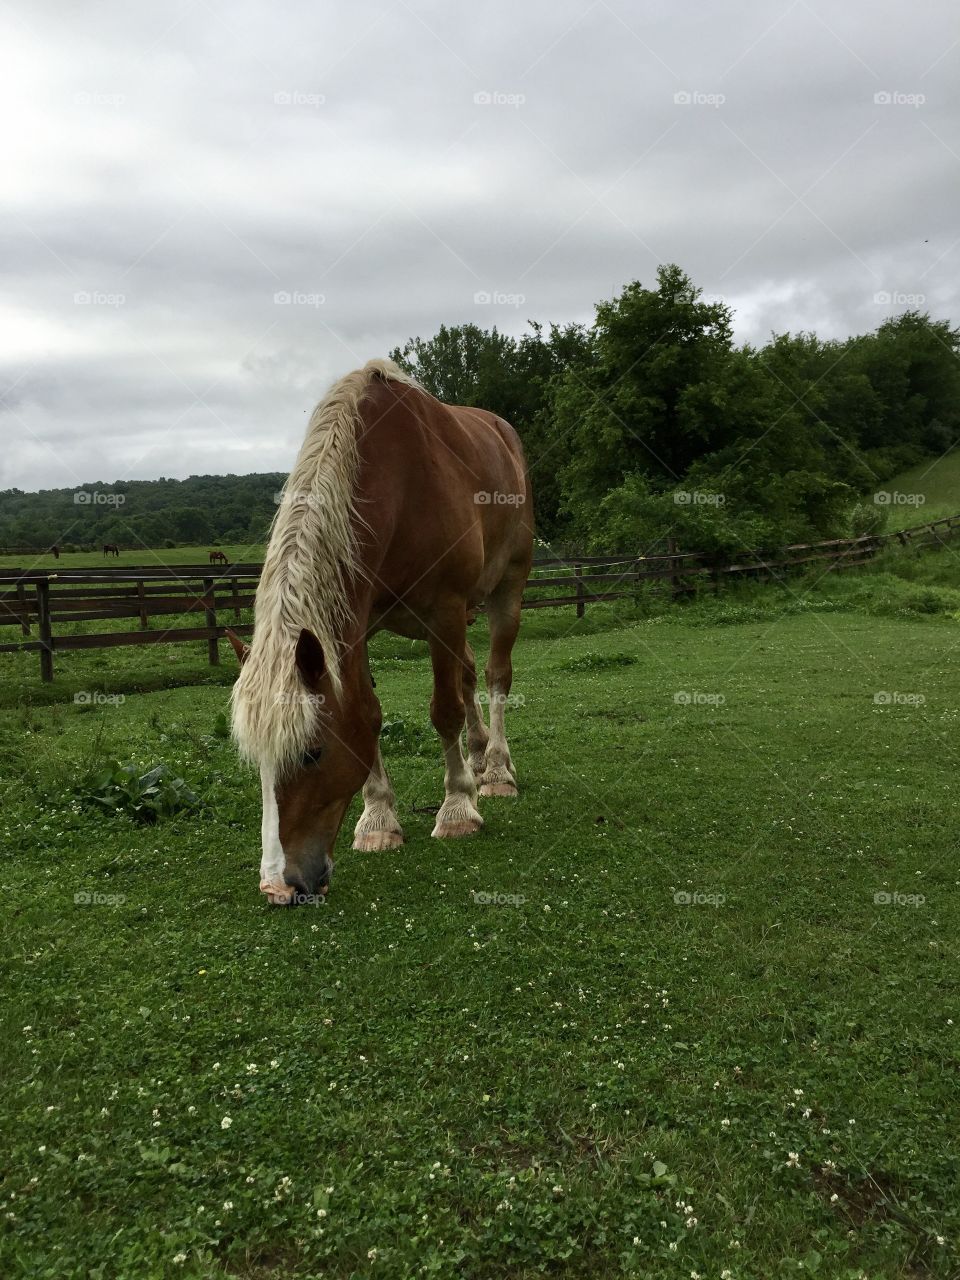 Belgian Draft Horse with its head down grazing in a grassy pasture.